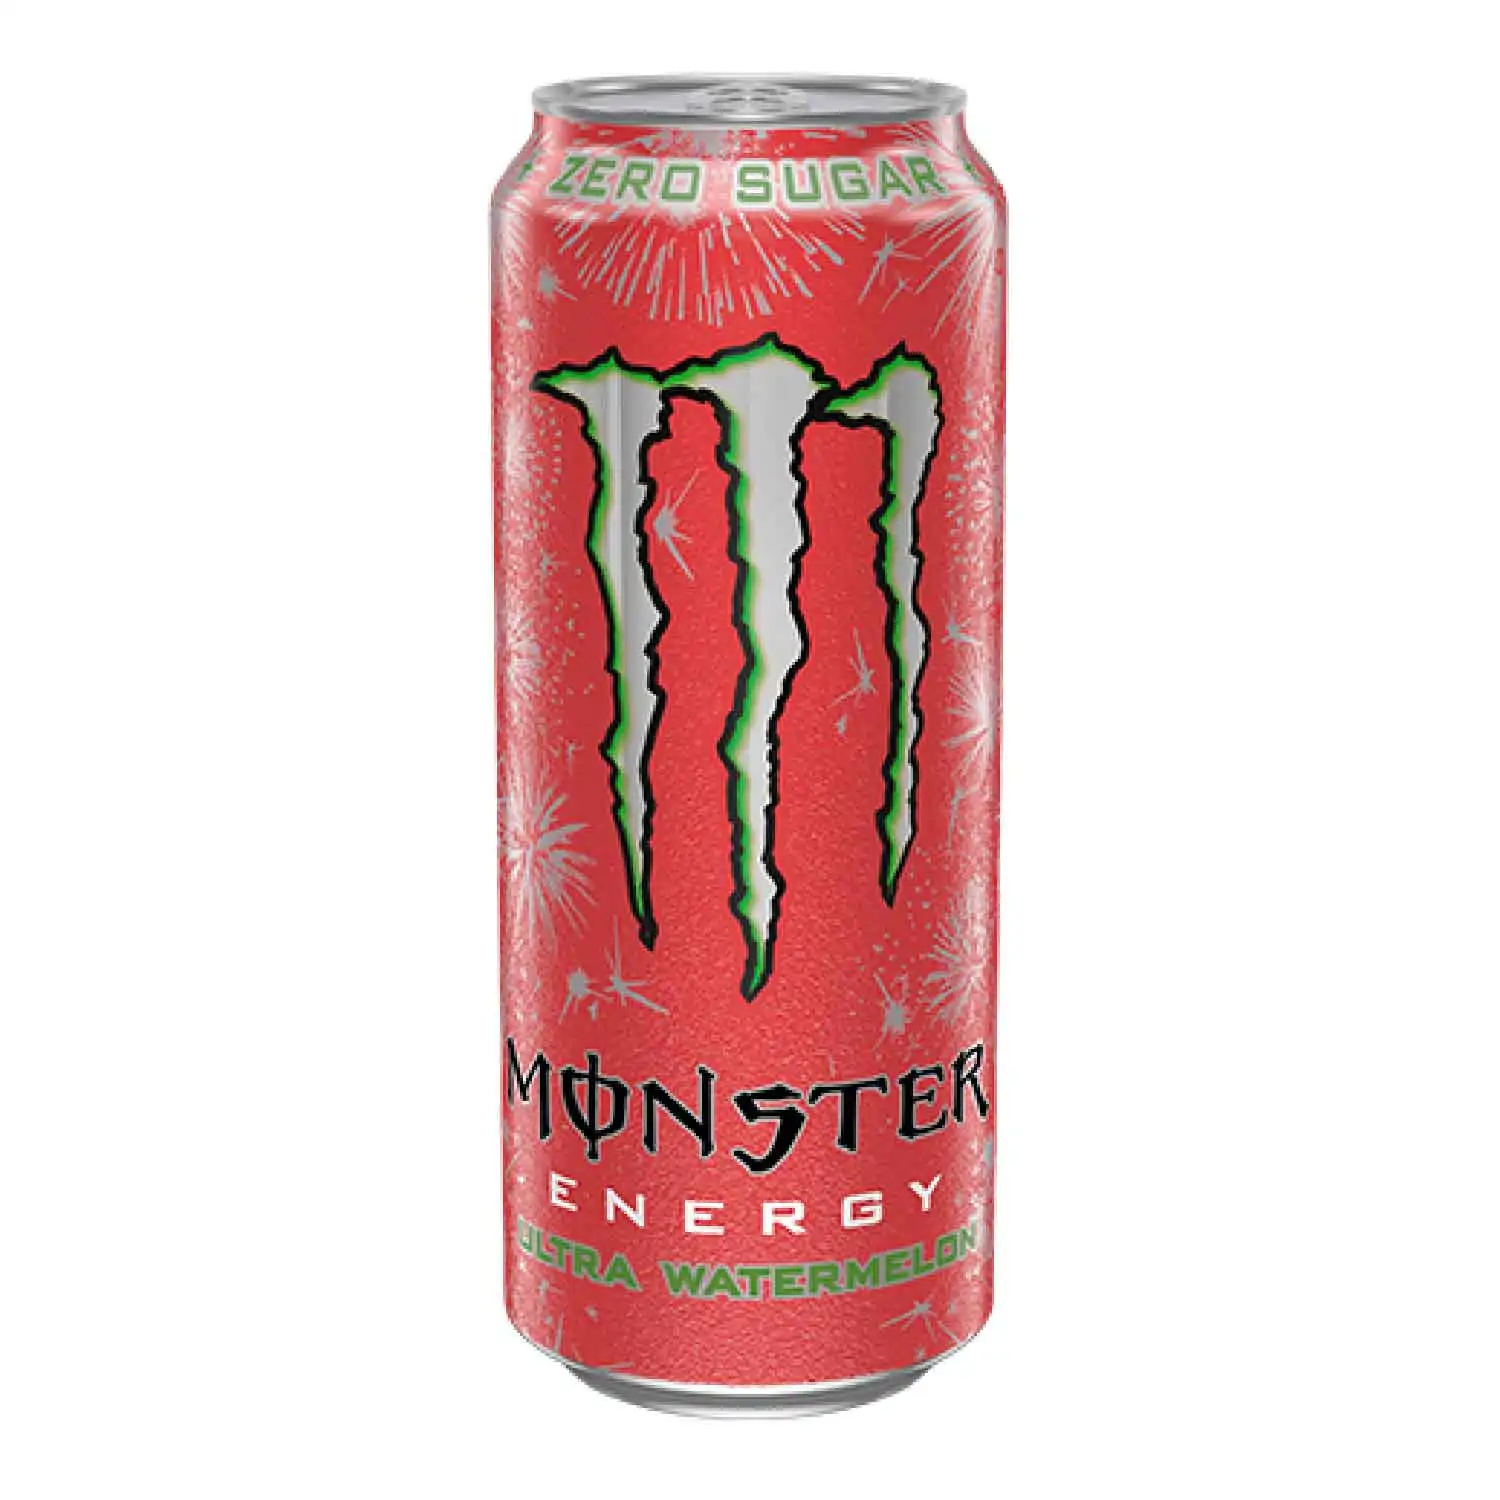 Monster ultra watermelon 50cl - Buy at Real Tobacco